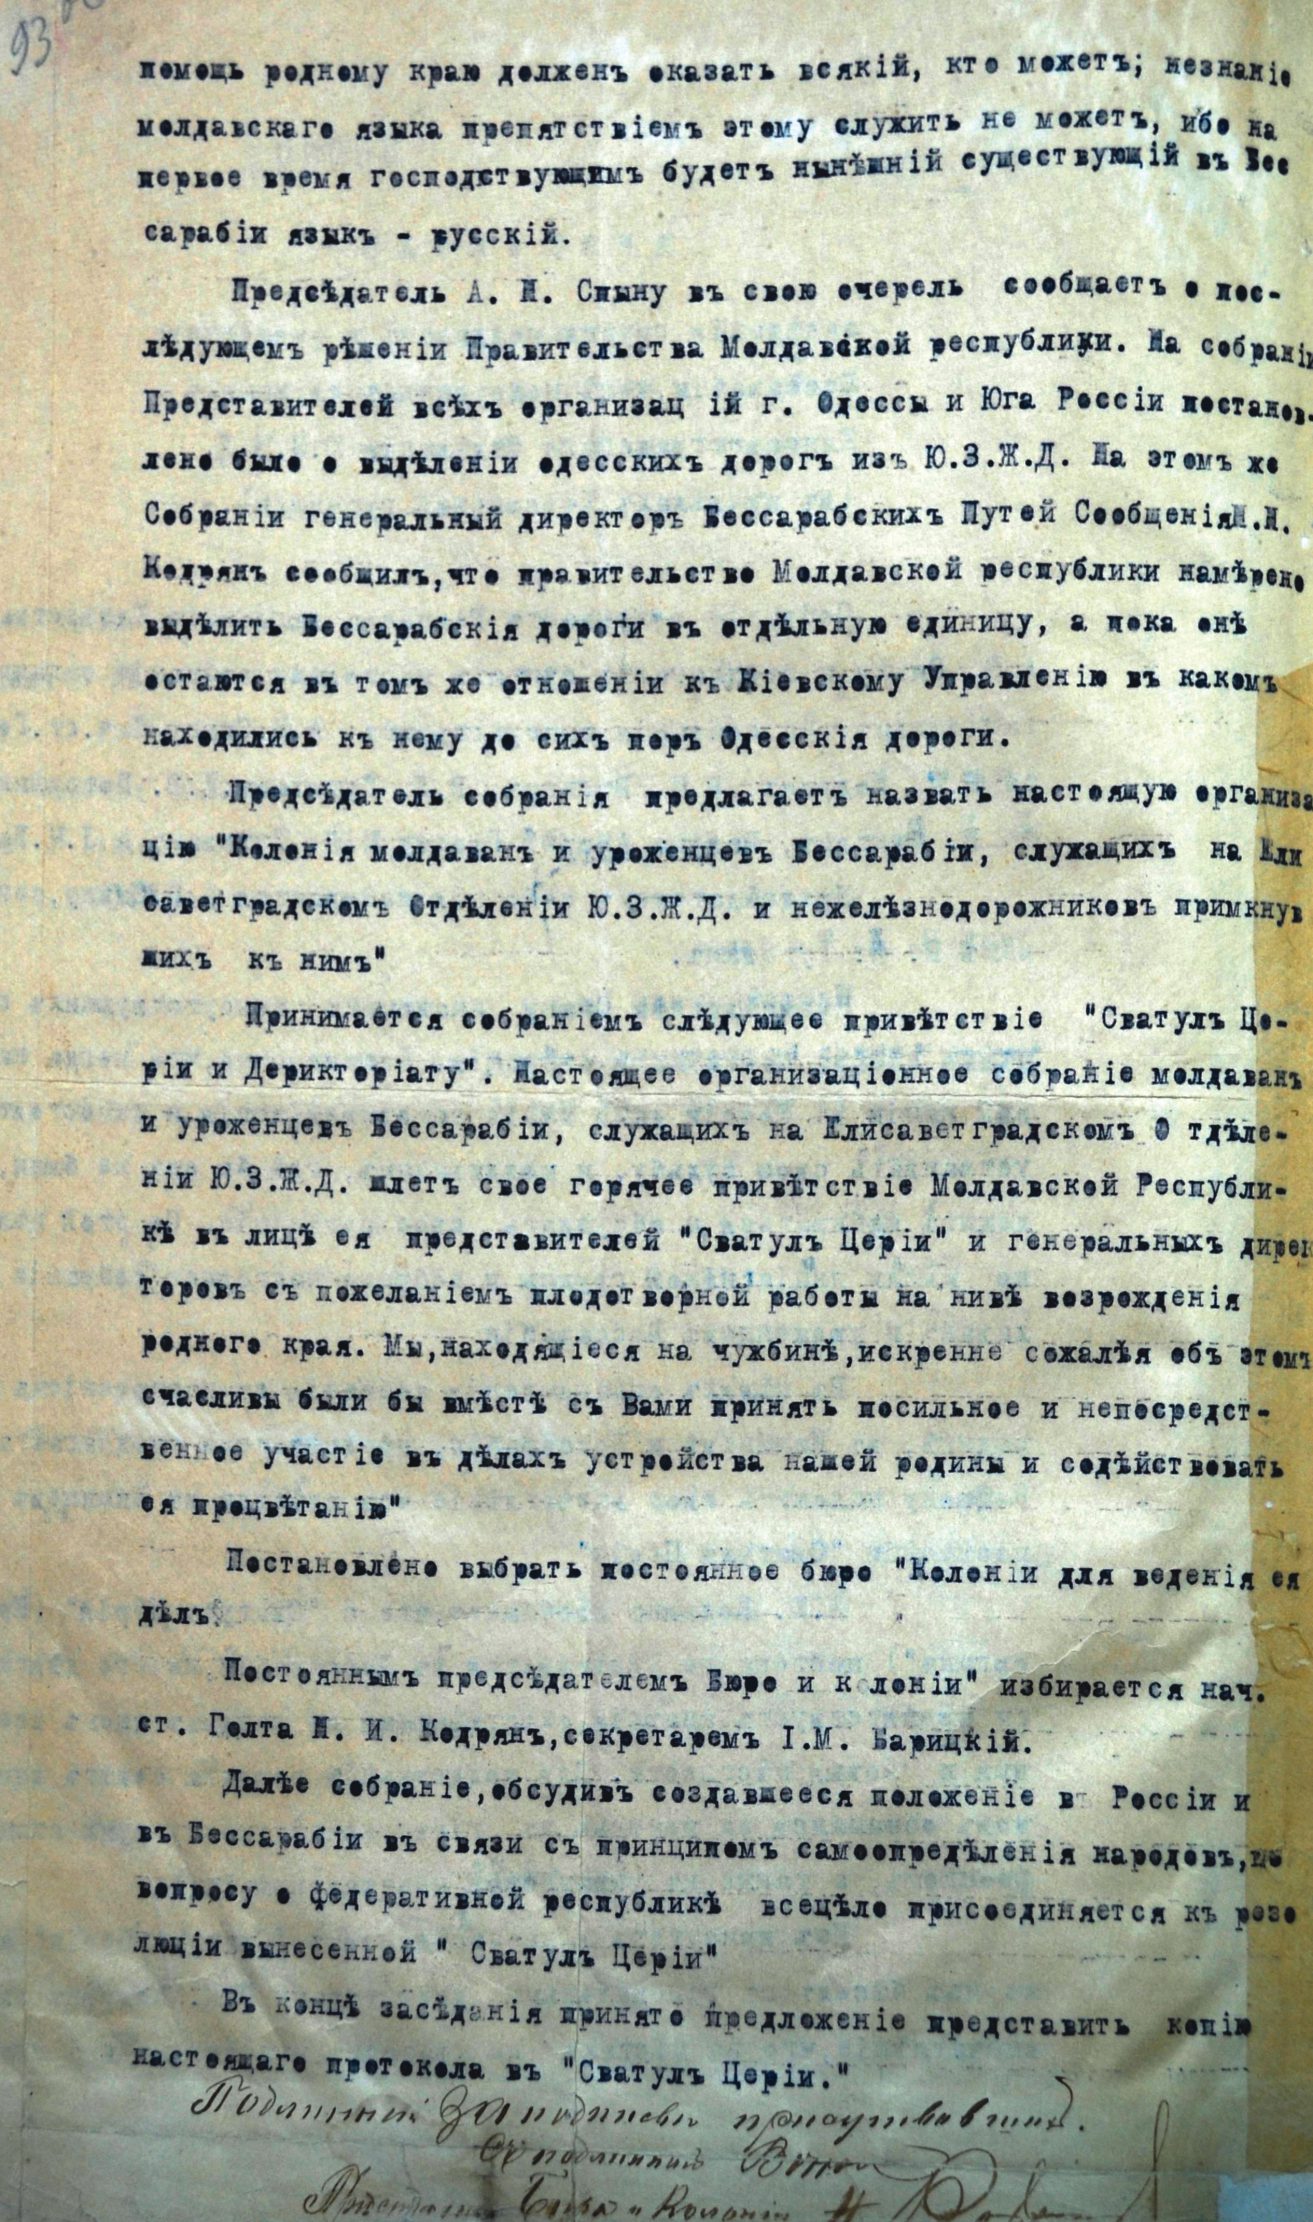 Minutes of the sitting of a group of Moldovans employed in the railways of the Herson governorate, the Elisavetgrad section, who joined the decisions adopted by the Country Counsel. January 14, 1918 (ANRM)